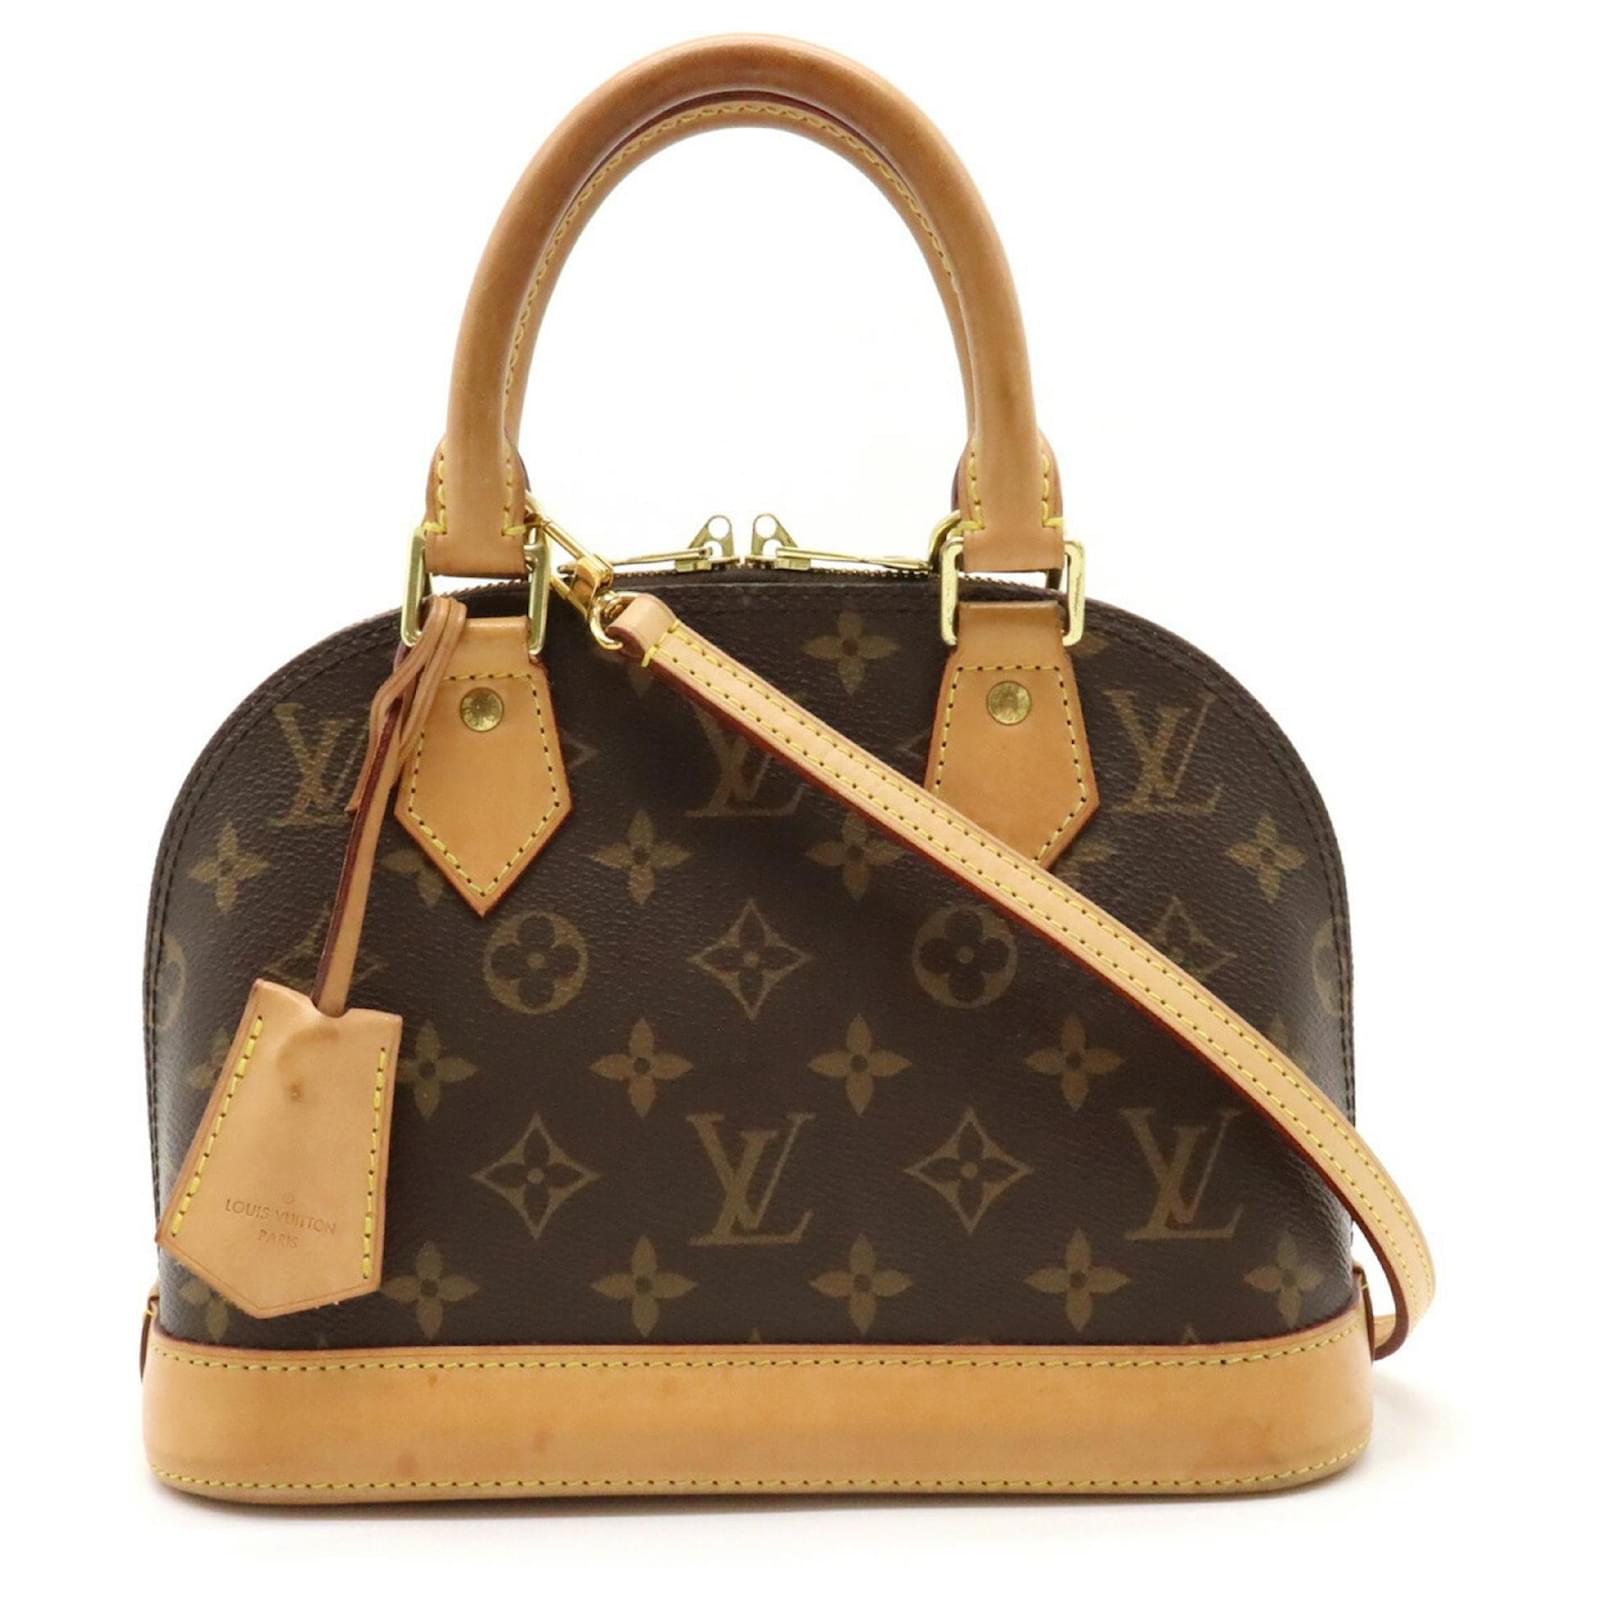 Alma bb leather crossbody bag Louis Vuitton Brown in Leather